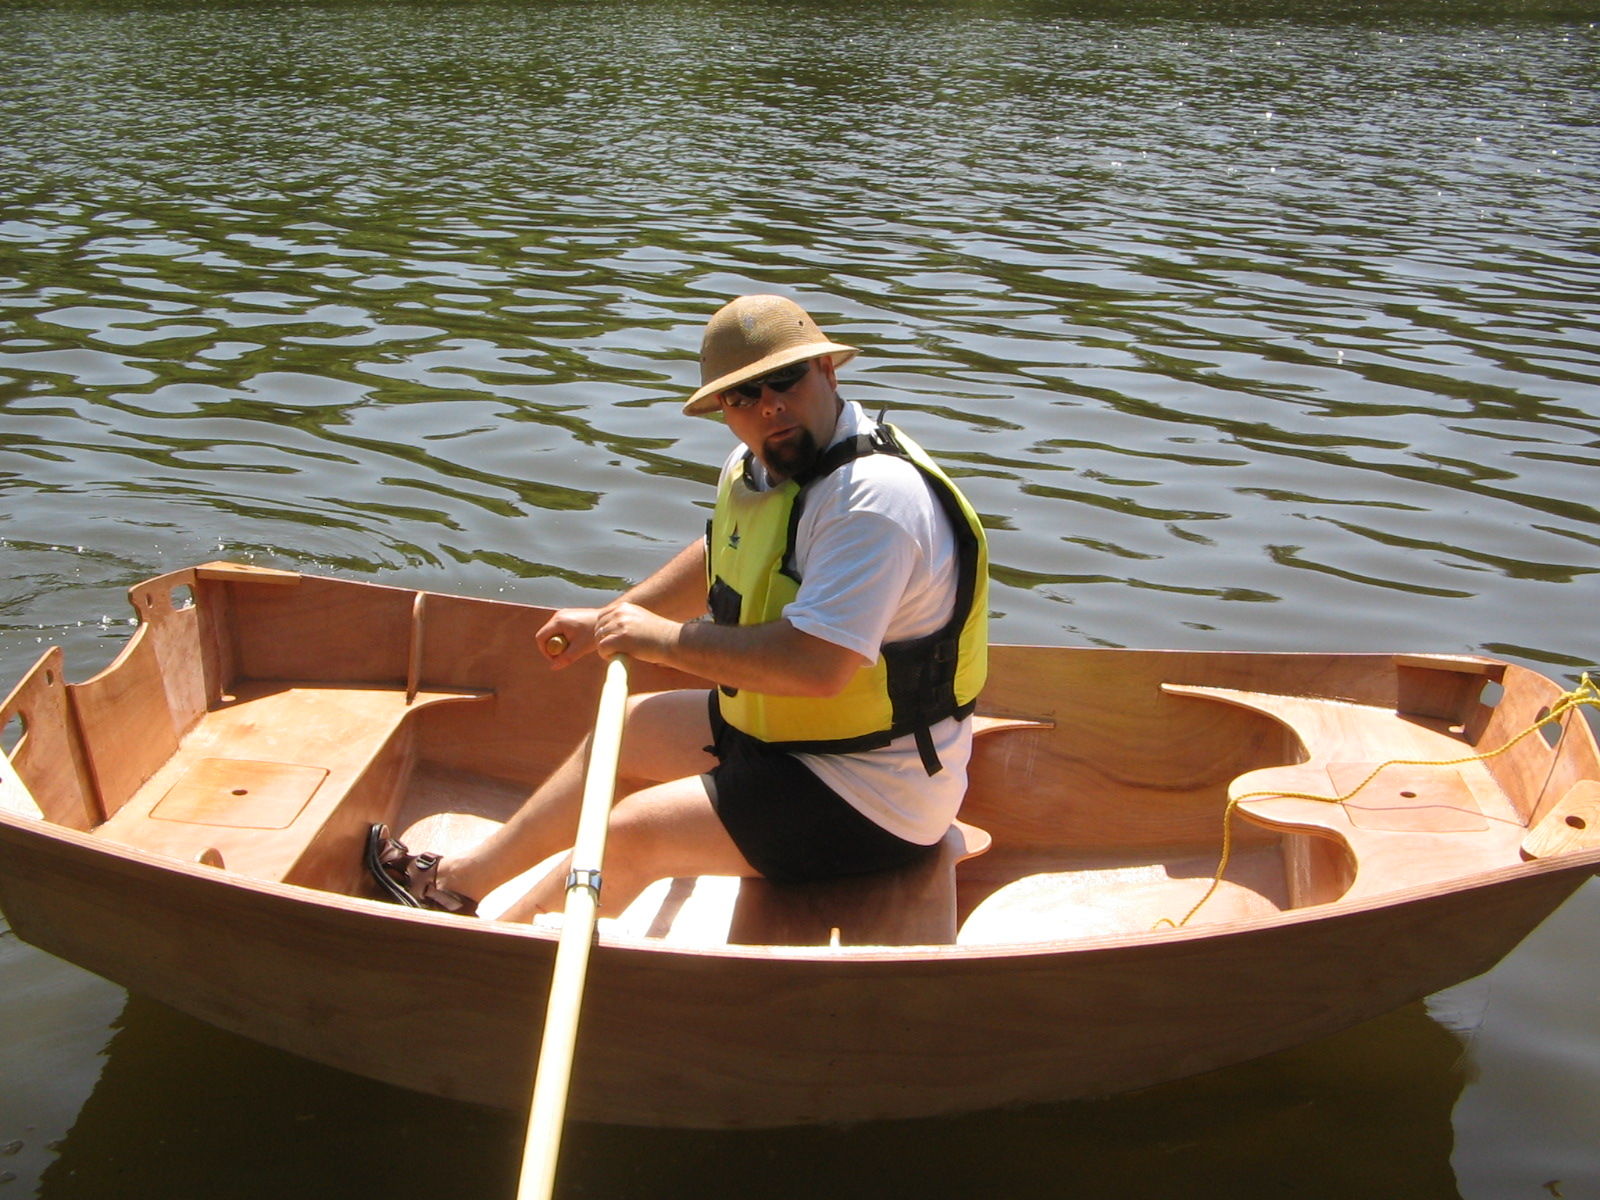  PK78] Pram type dinghy. Oars, sail or outboard, wider than the D4/D5